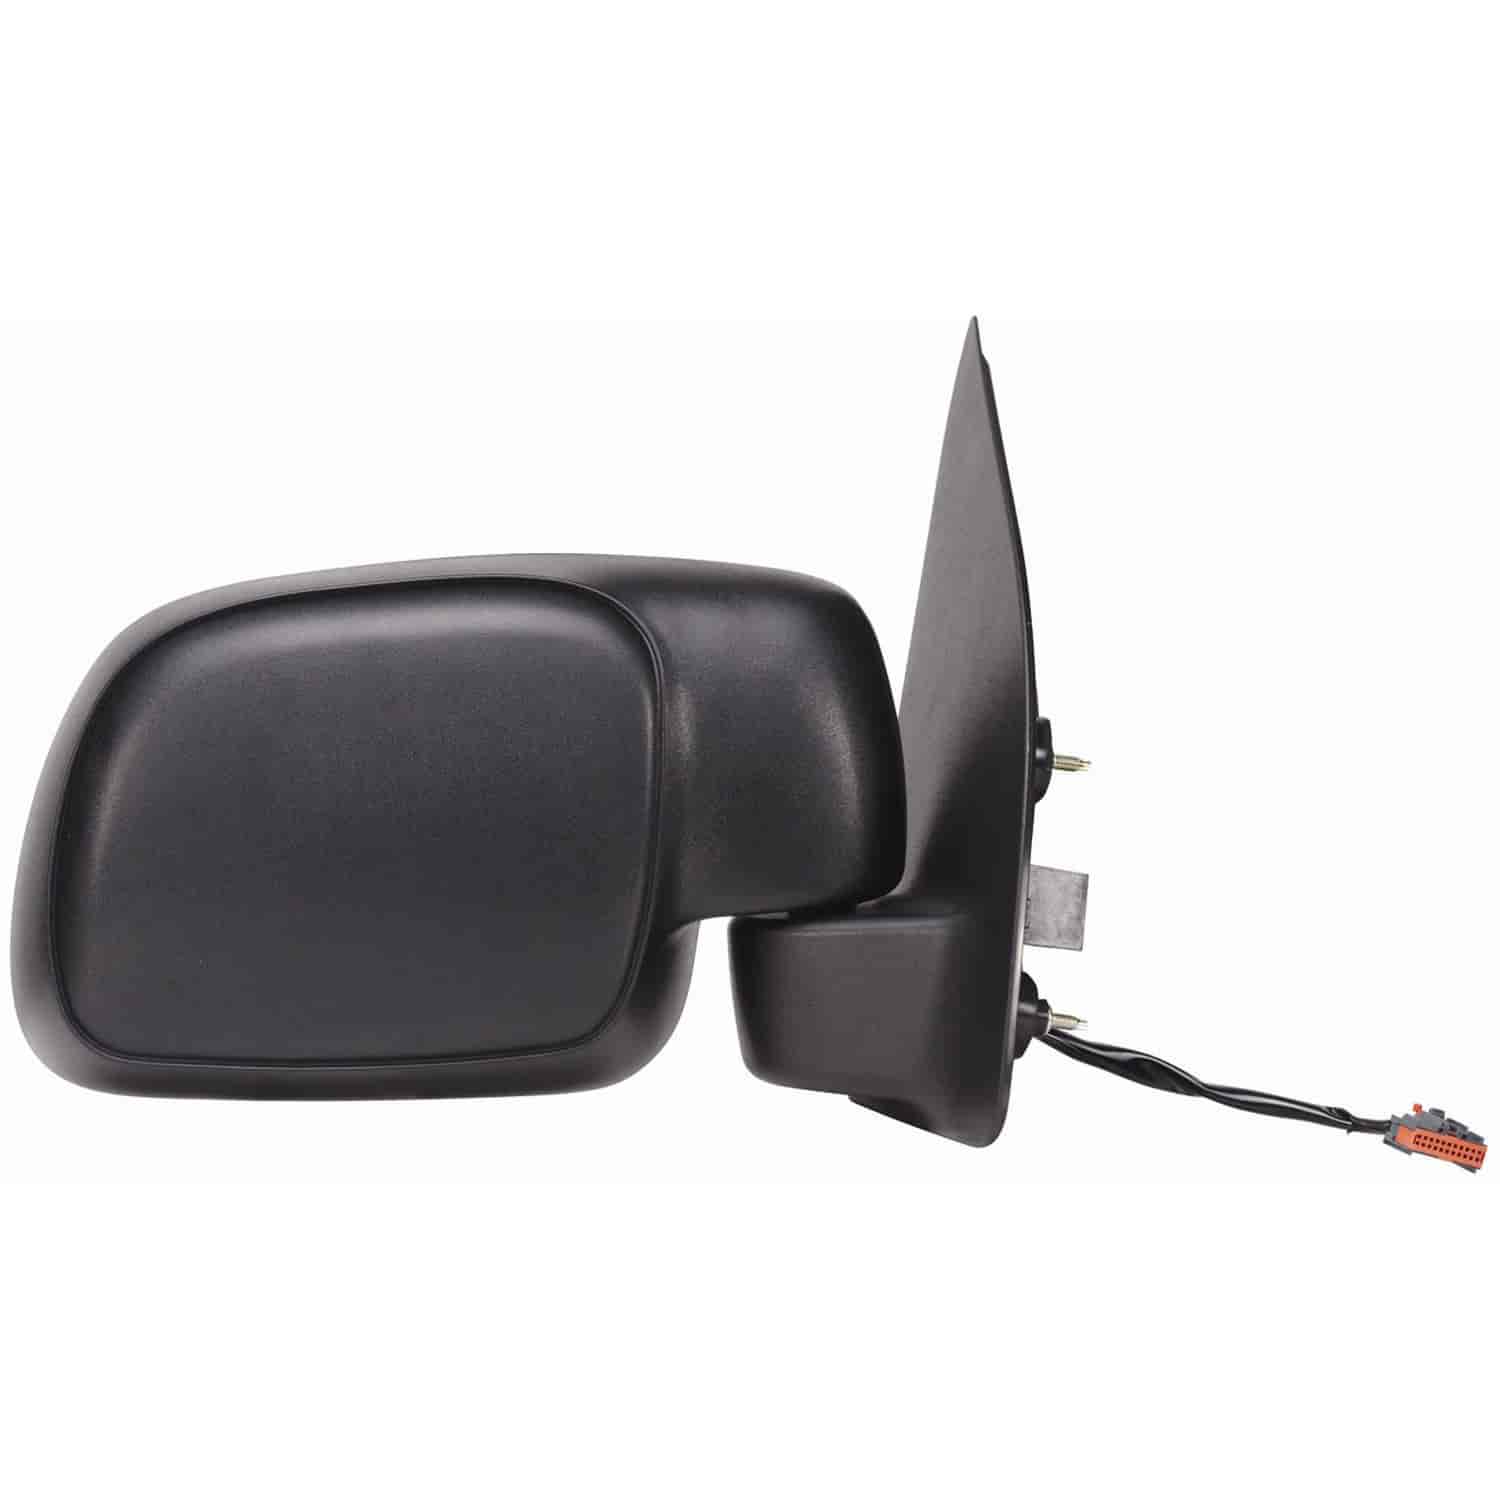 OEM Style Replacement mirror for 01-05 Ford Excursion